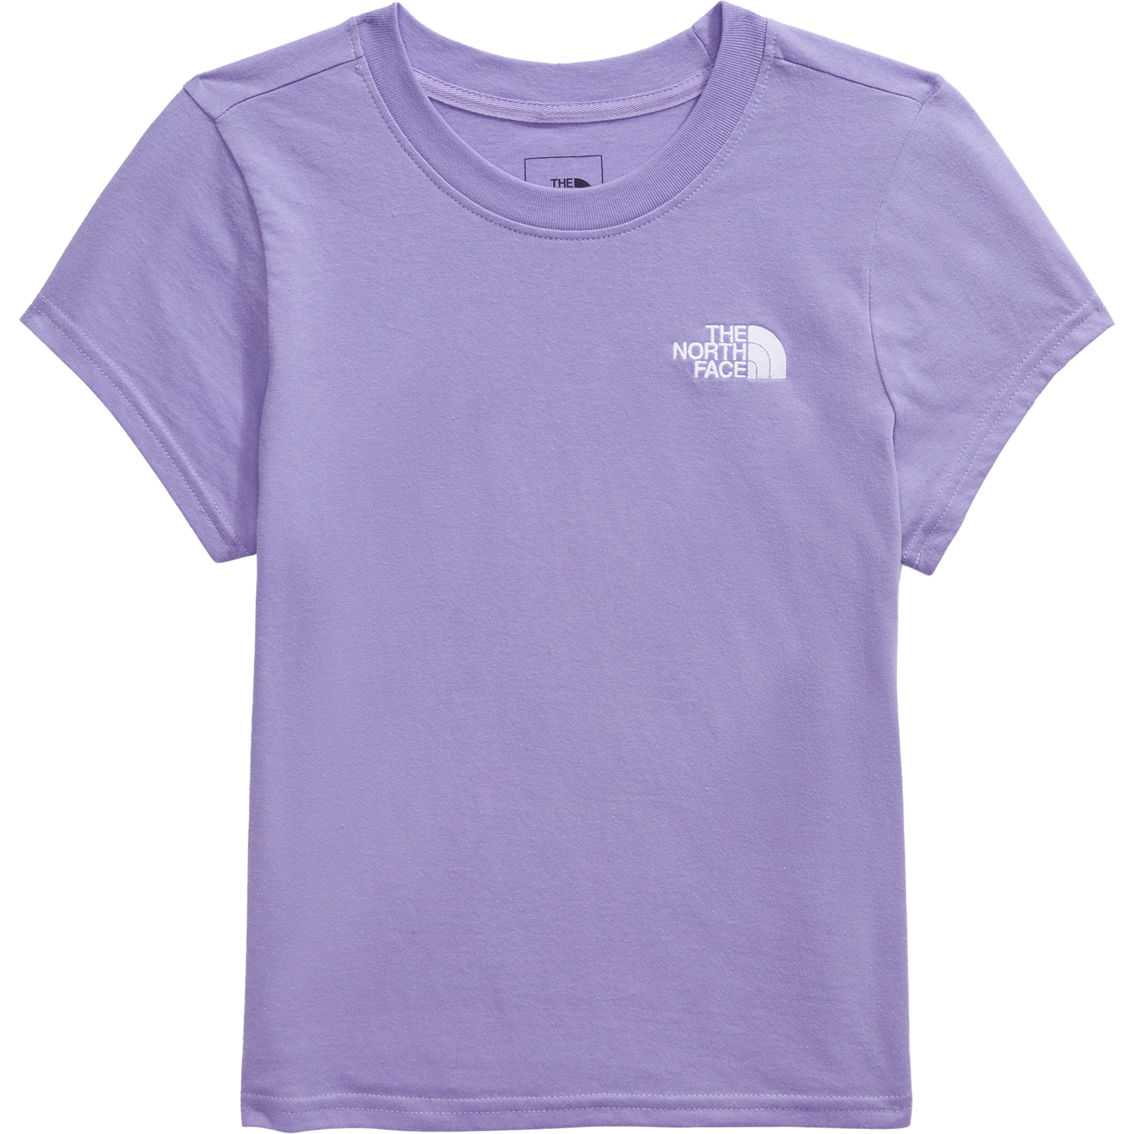 The North Face Evolution Cutie Tee - Image 4 of 4